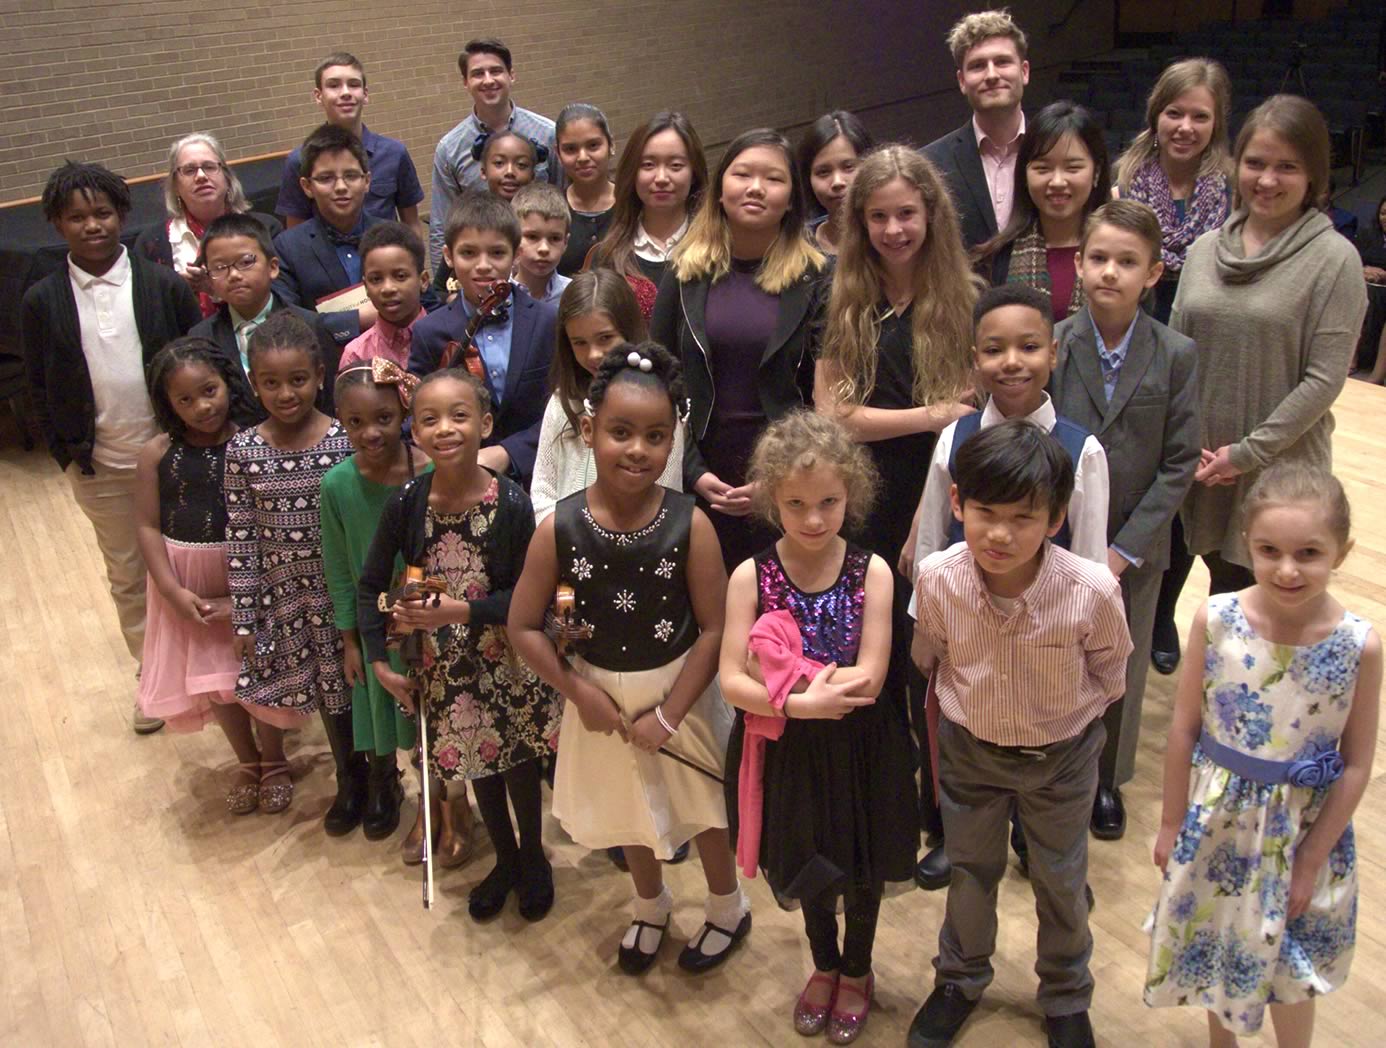 Group photo of young recital students and their teachers